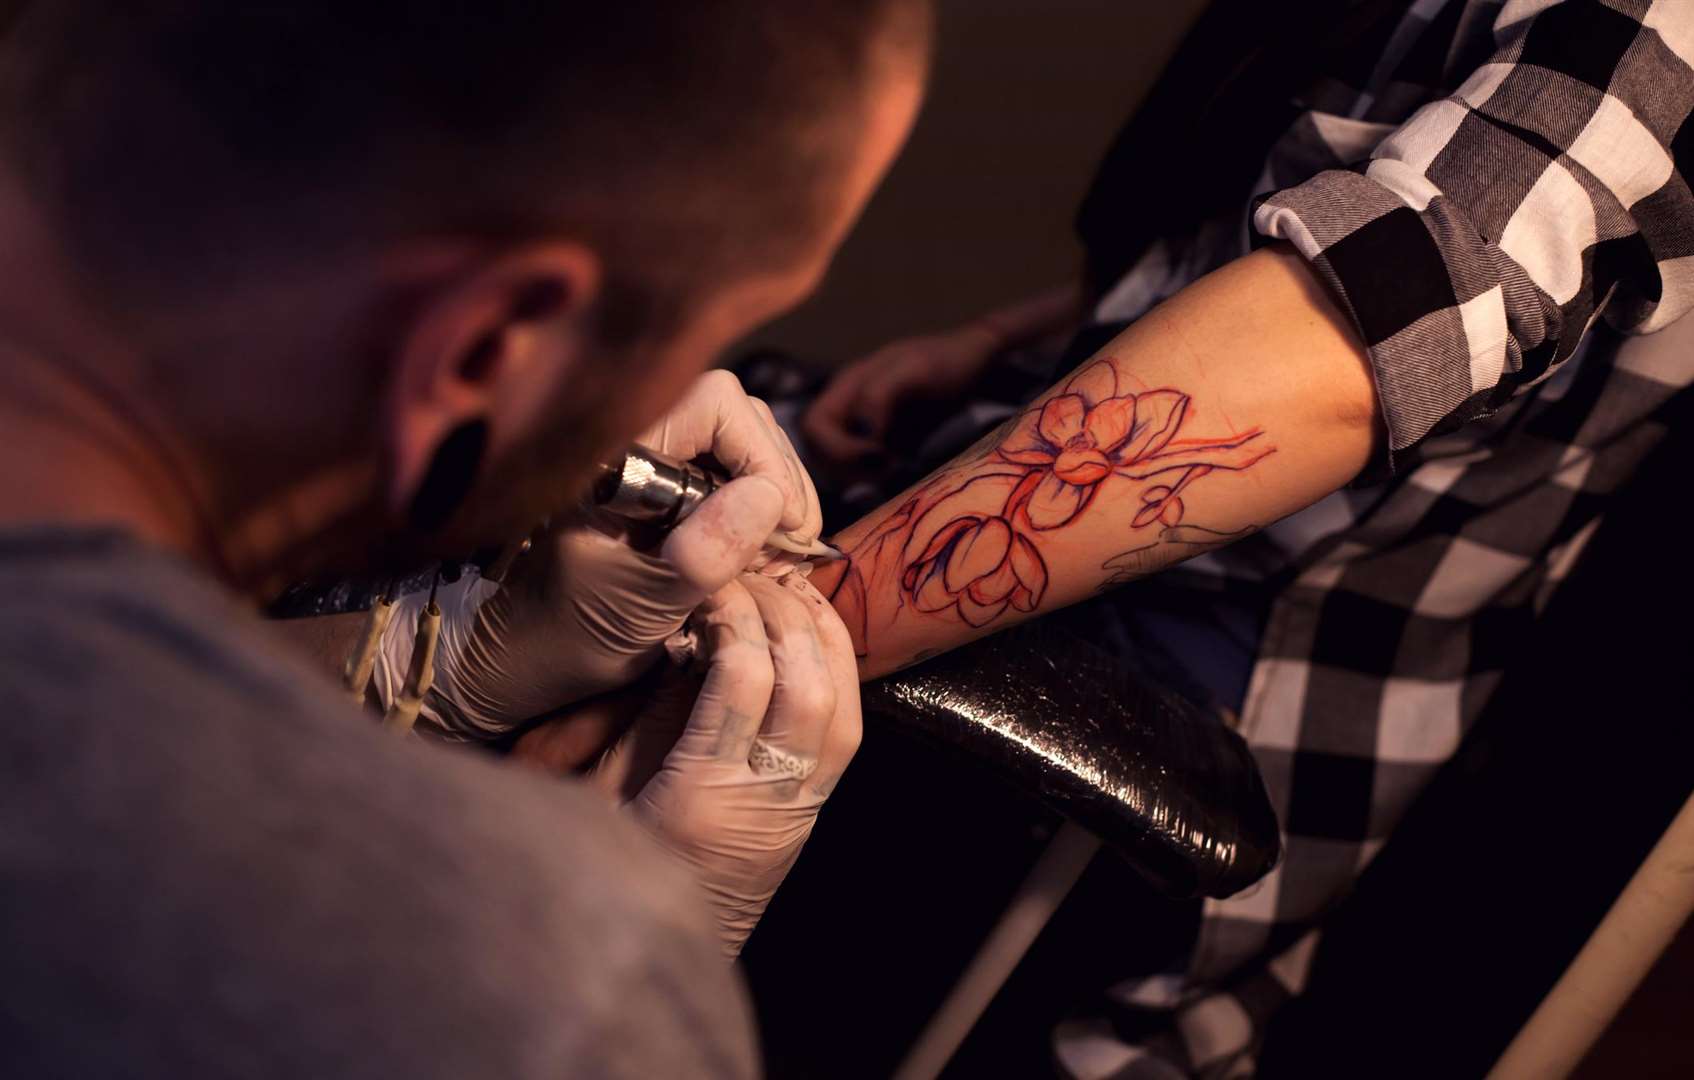 Watch tattoo artists in action